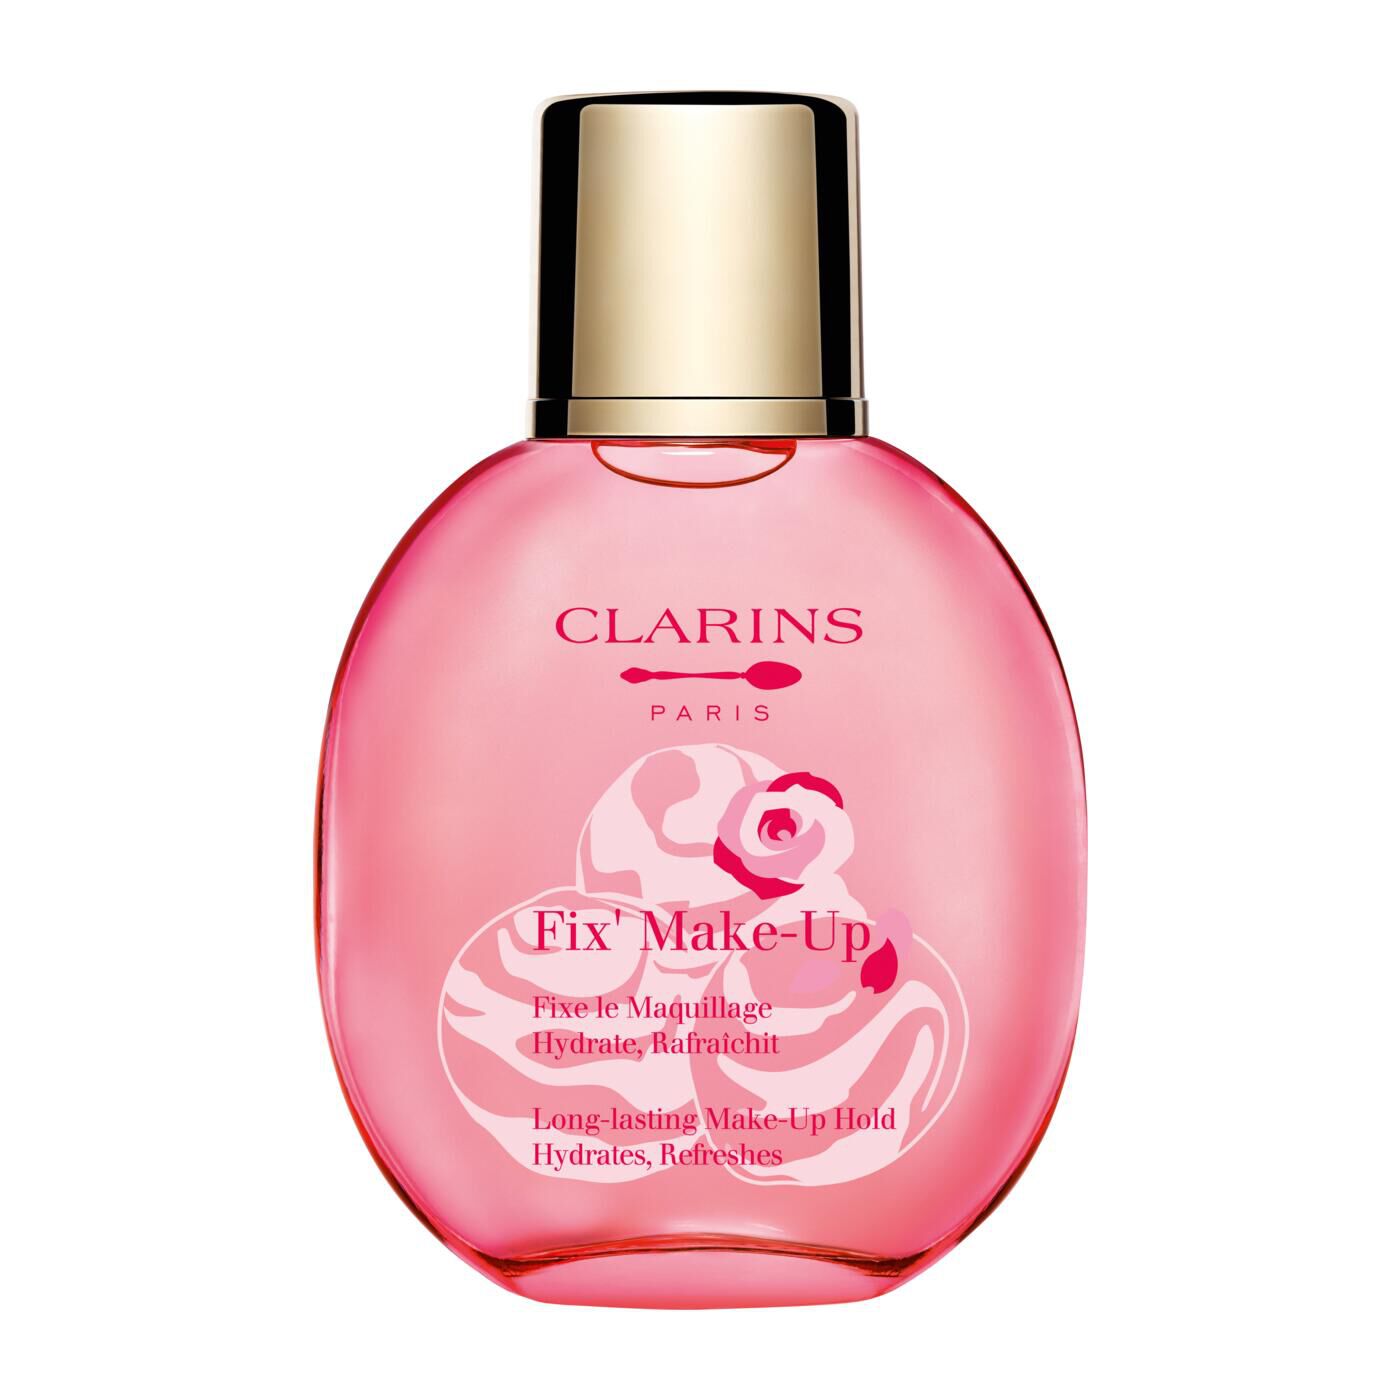 Clarins Fix' Make-up - Patisserie Collection 1.7 Oz. In White